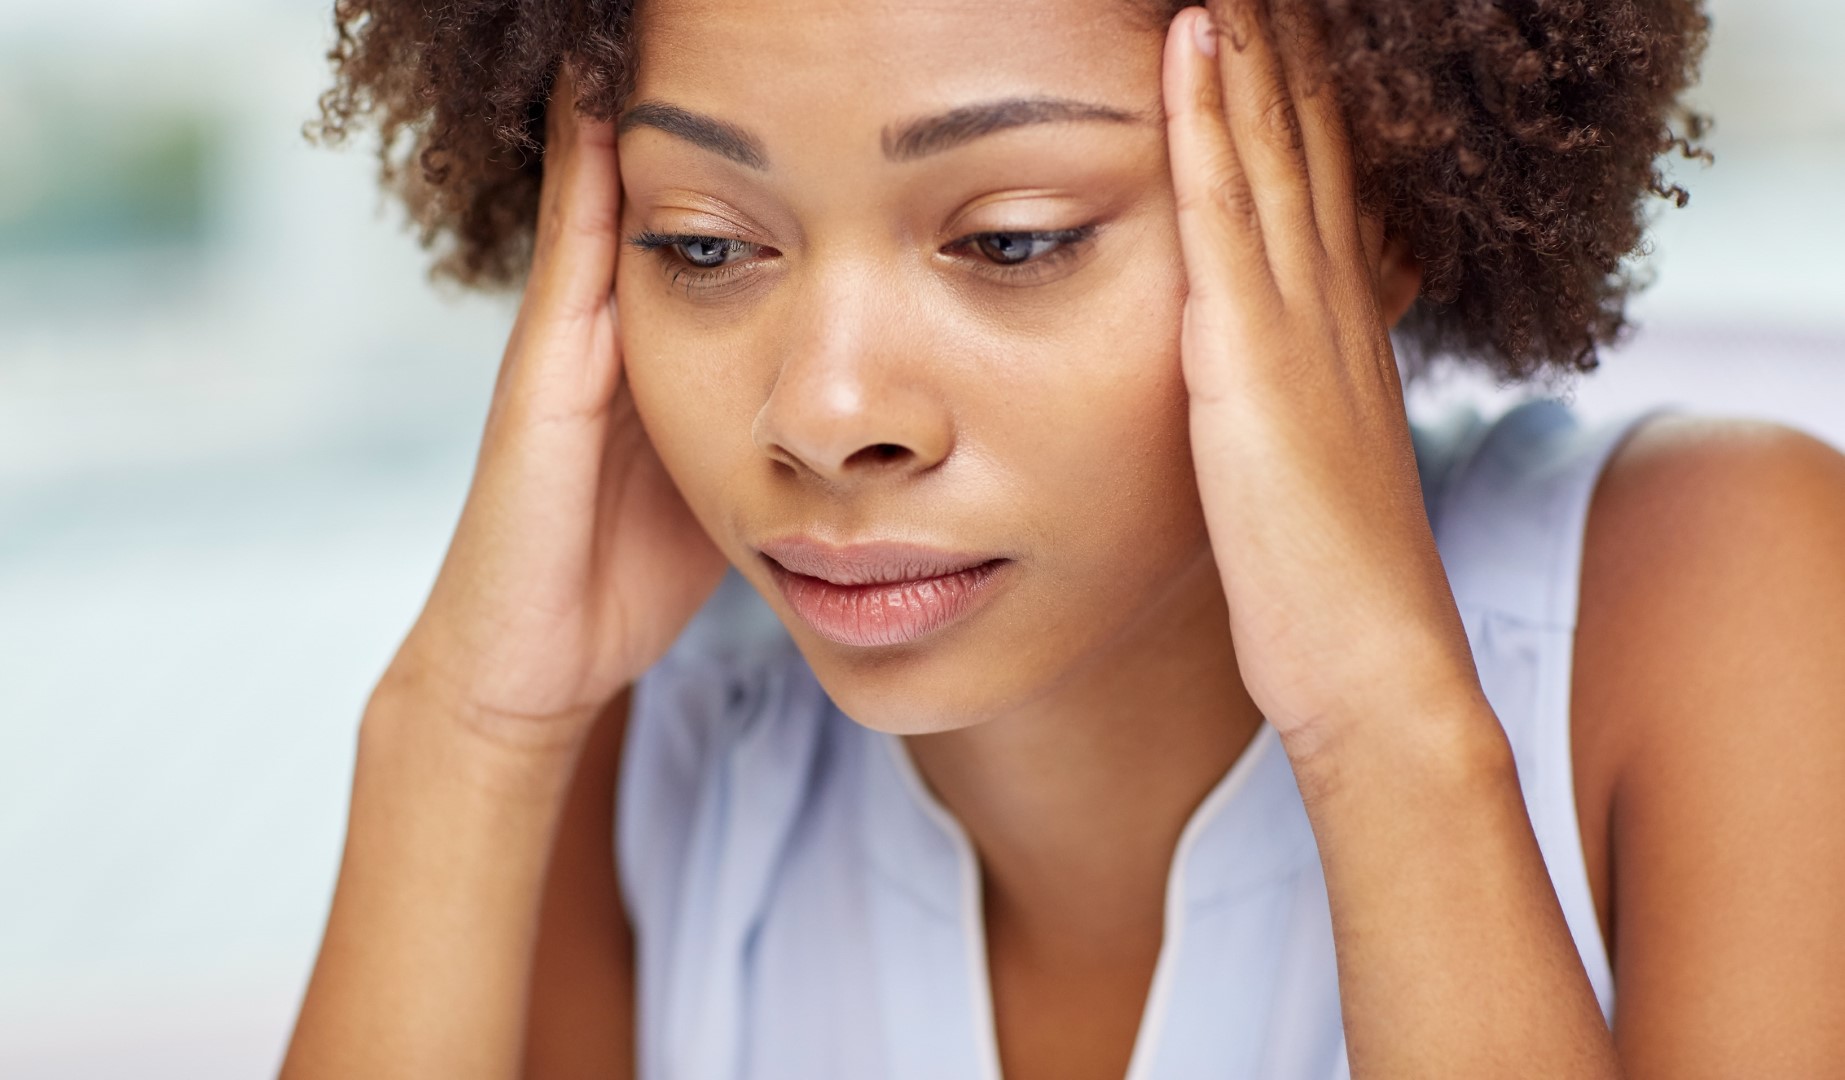 woman dealing with stress and fatigue